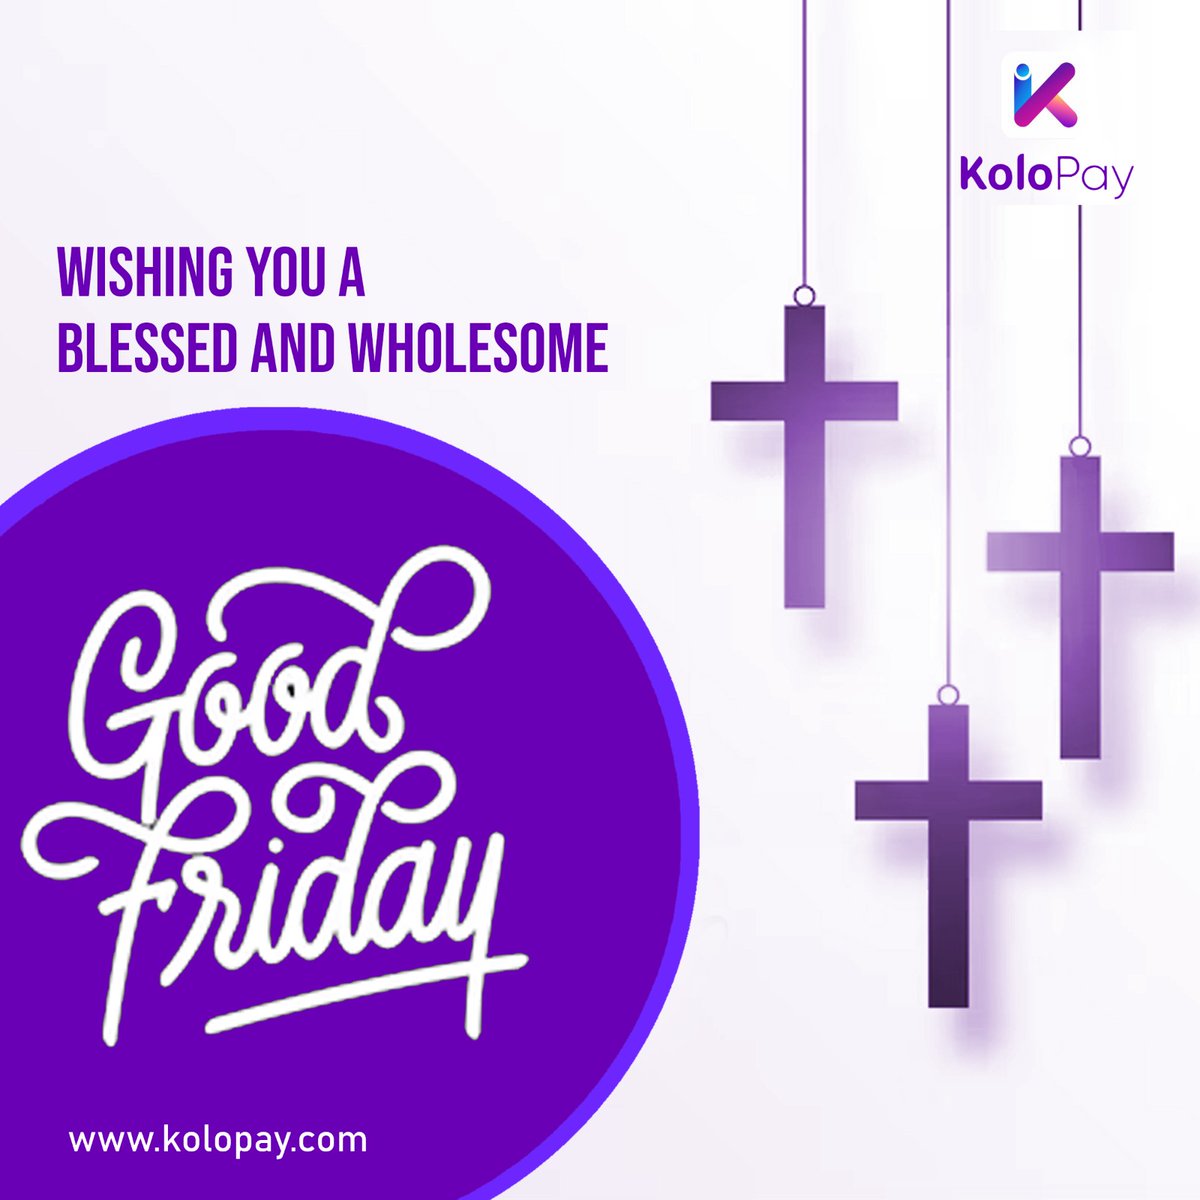 Have a peaceful and memorable Good Friday.

'Good Friday is not about us trying to get right with God. It is about us entering the already existing reconciliation between God and humanity.' - Timothy Keller 

#kolopay #kolopayapp #goodfriday #friday #timothykeller #explore